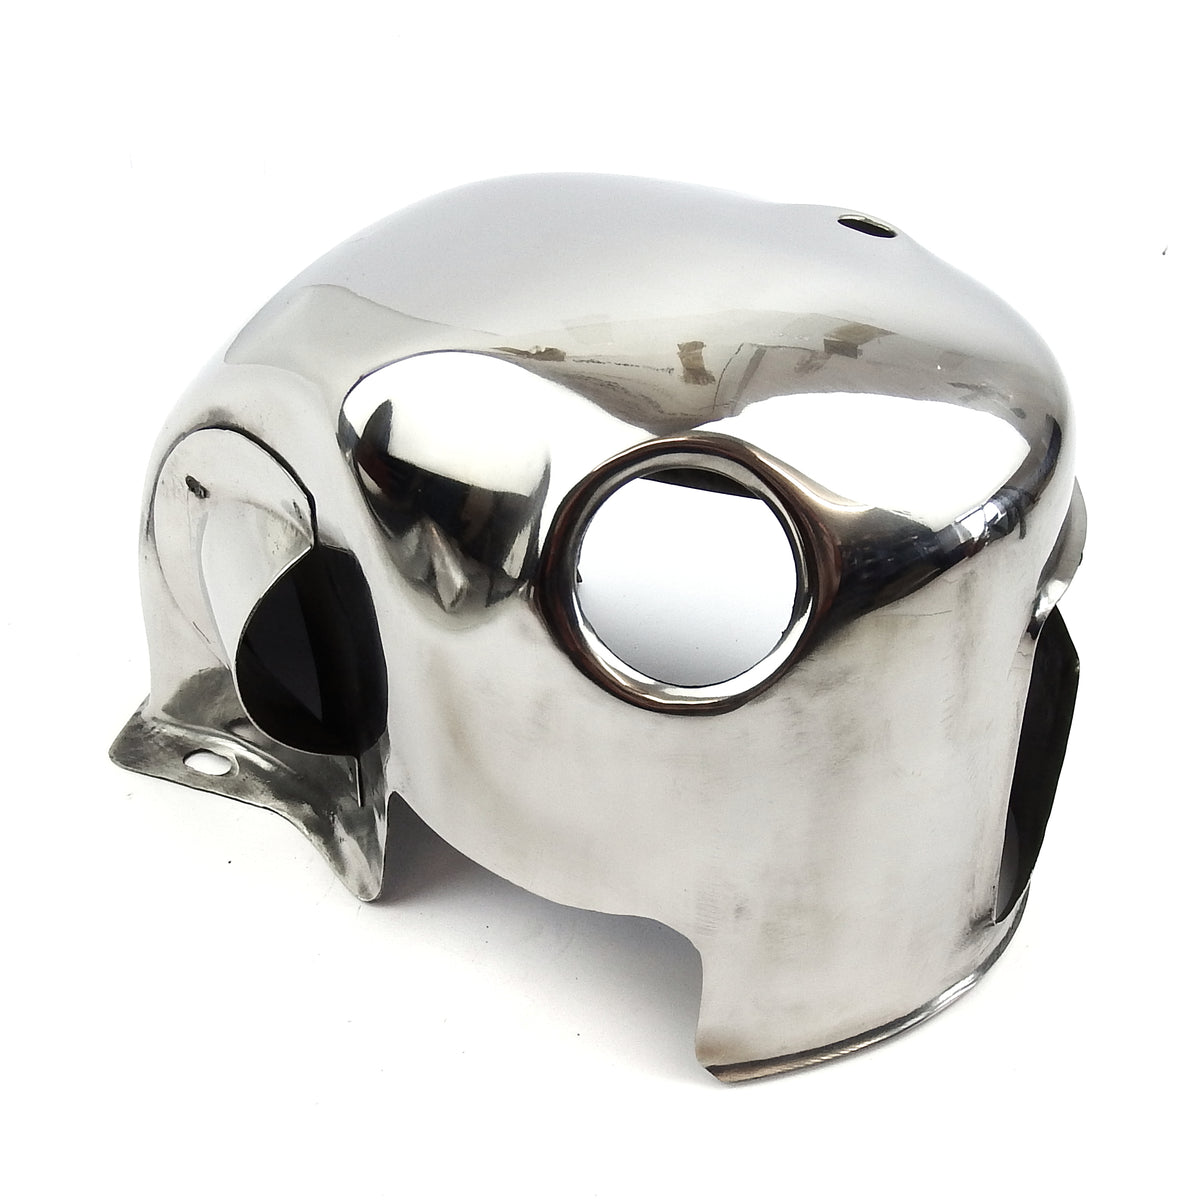 Lambretta GP DL Cylinder Head Cowling - Polished Stainless Steel